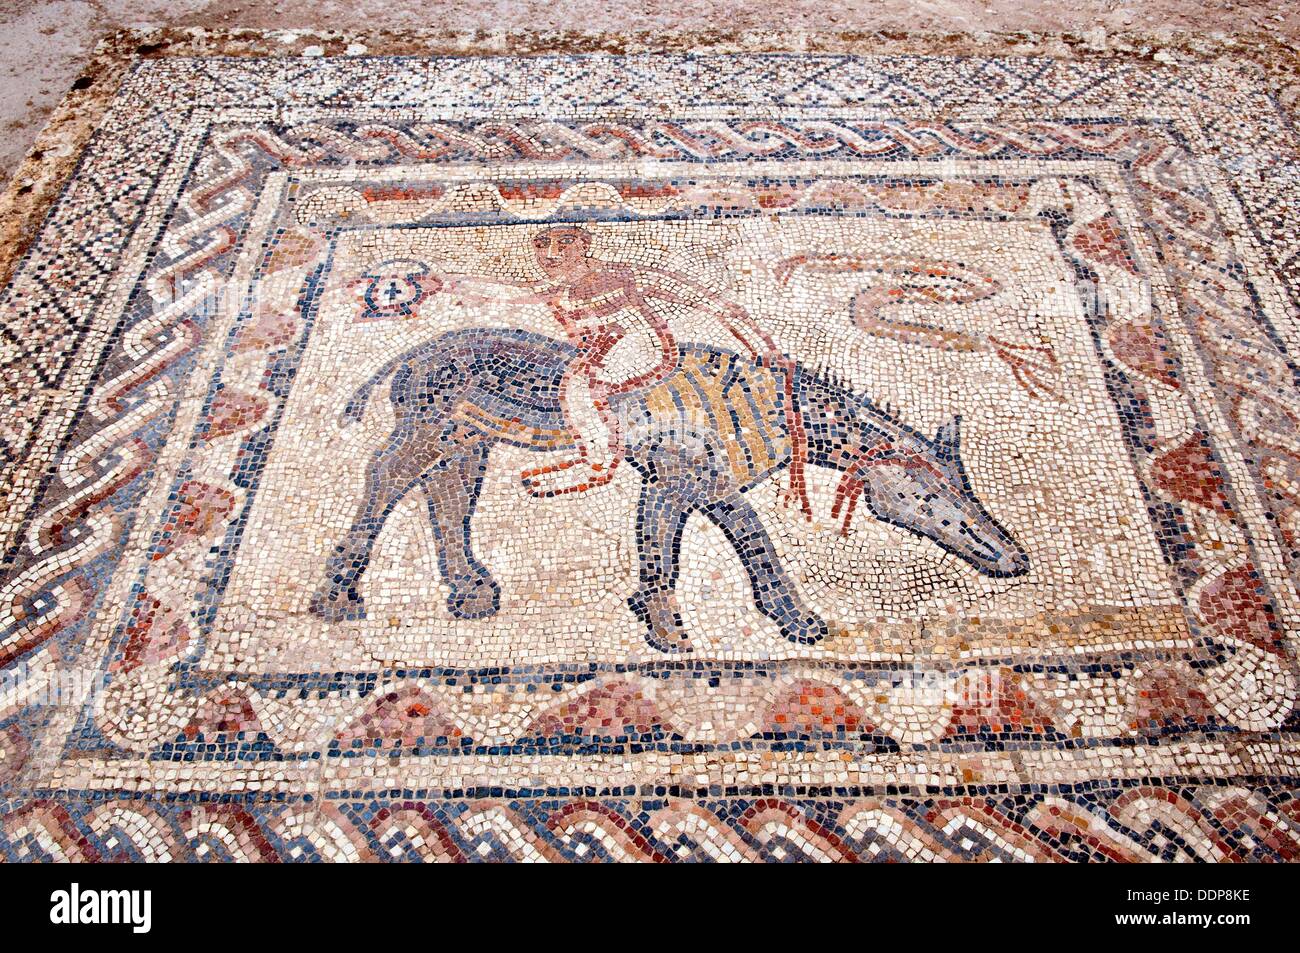 A mosaic tile graphic on the floor of the ruined Volubilis archeological site near Moulay Idriss, Morocco Stock Photo